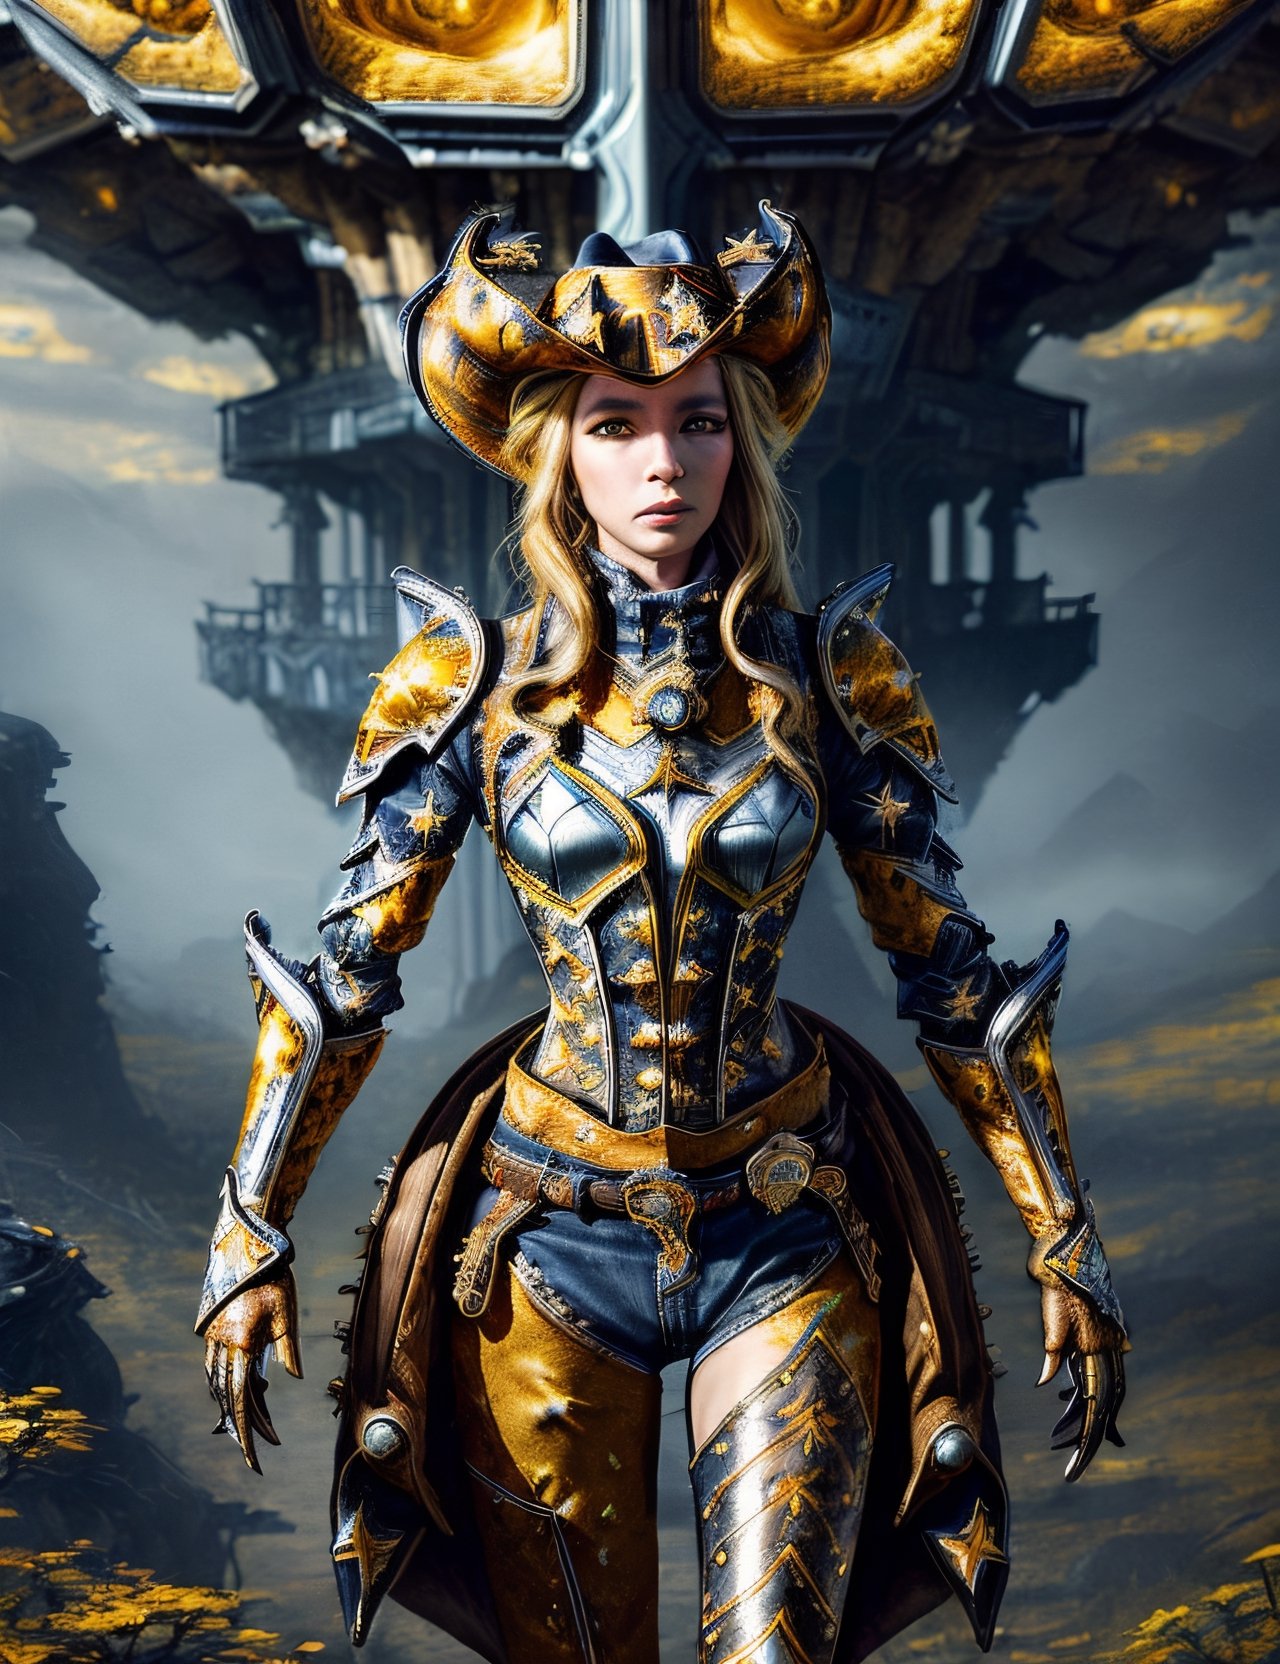 (Cowboy shot of Woman:1.5) DonML1quidG0ld, hyper detailed, full body armor, awesome, stunningly beautiful, fairytale, whimsical, tech sci-fi futuristic